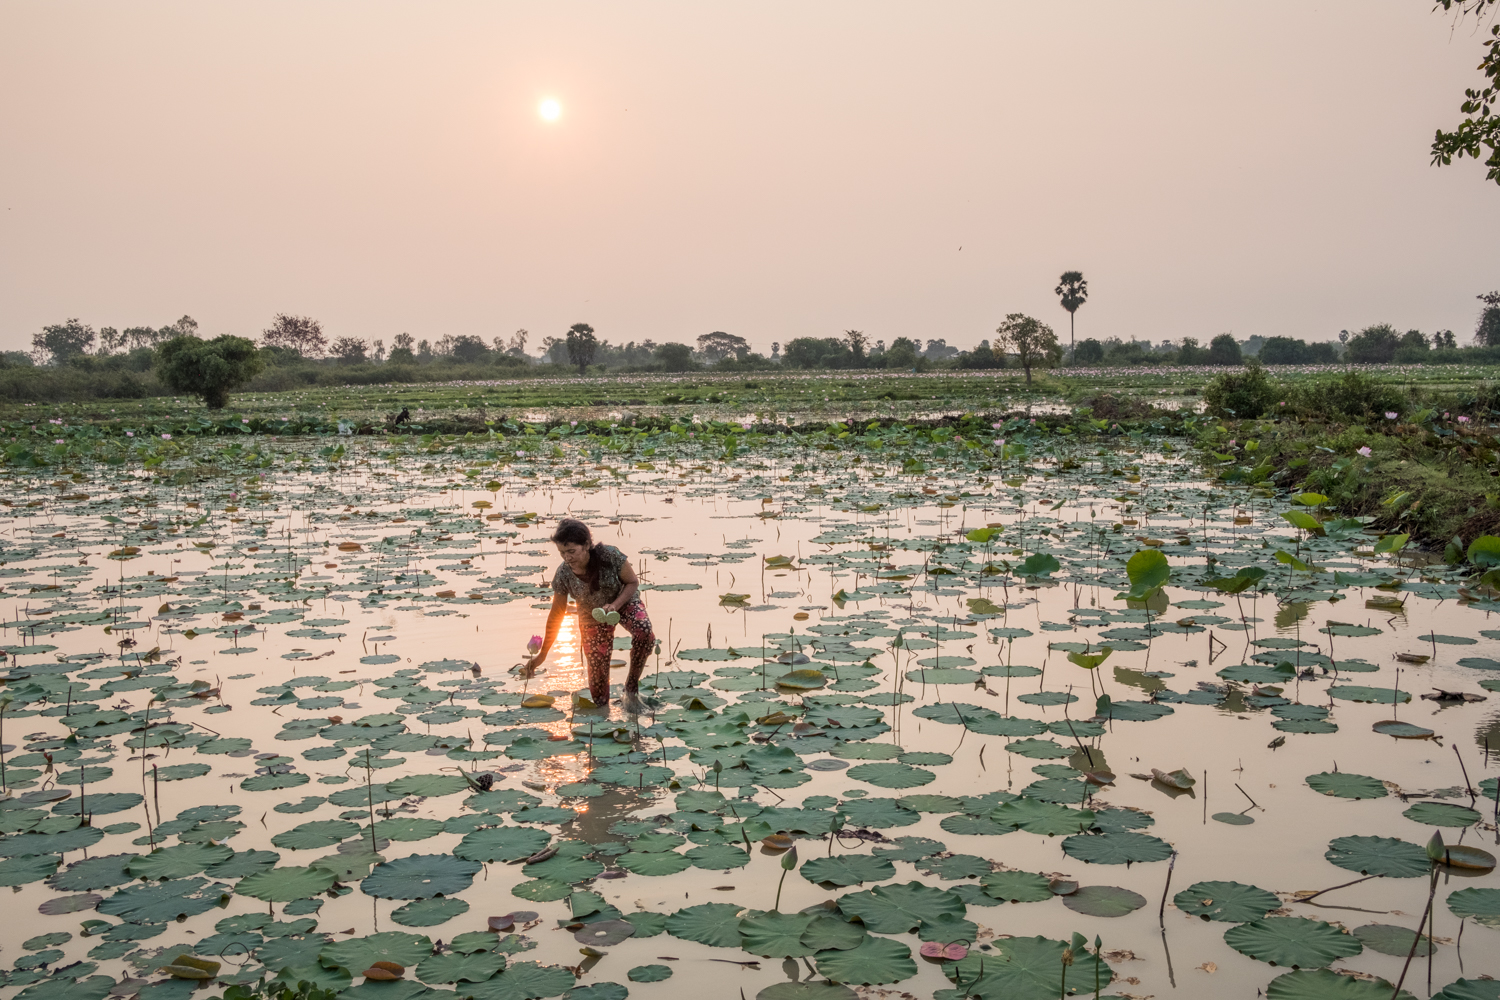  In Kampong Tralach, Cambodia, a small district along the Tonle Sap River, a woman wades through a field picking lotus flowers. 